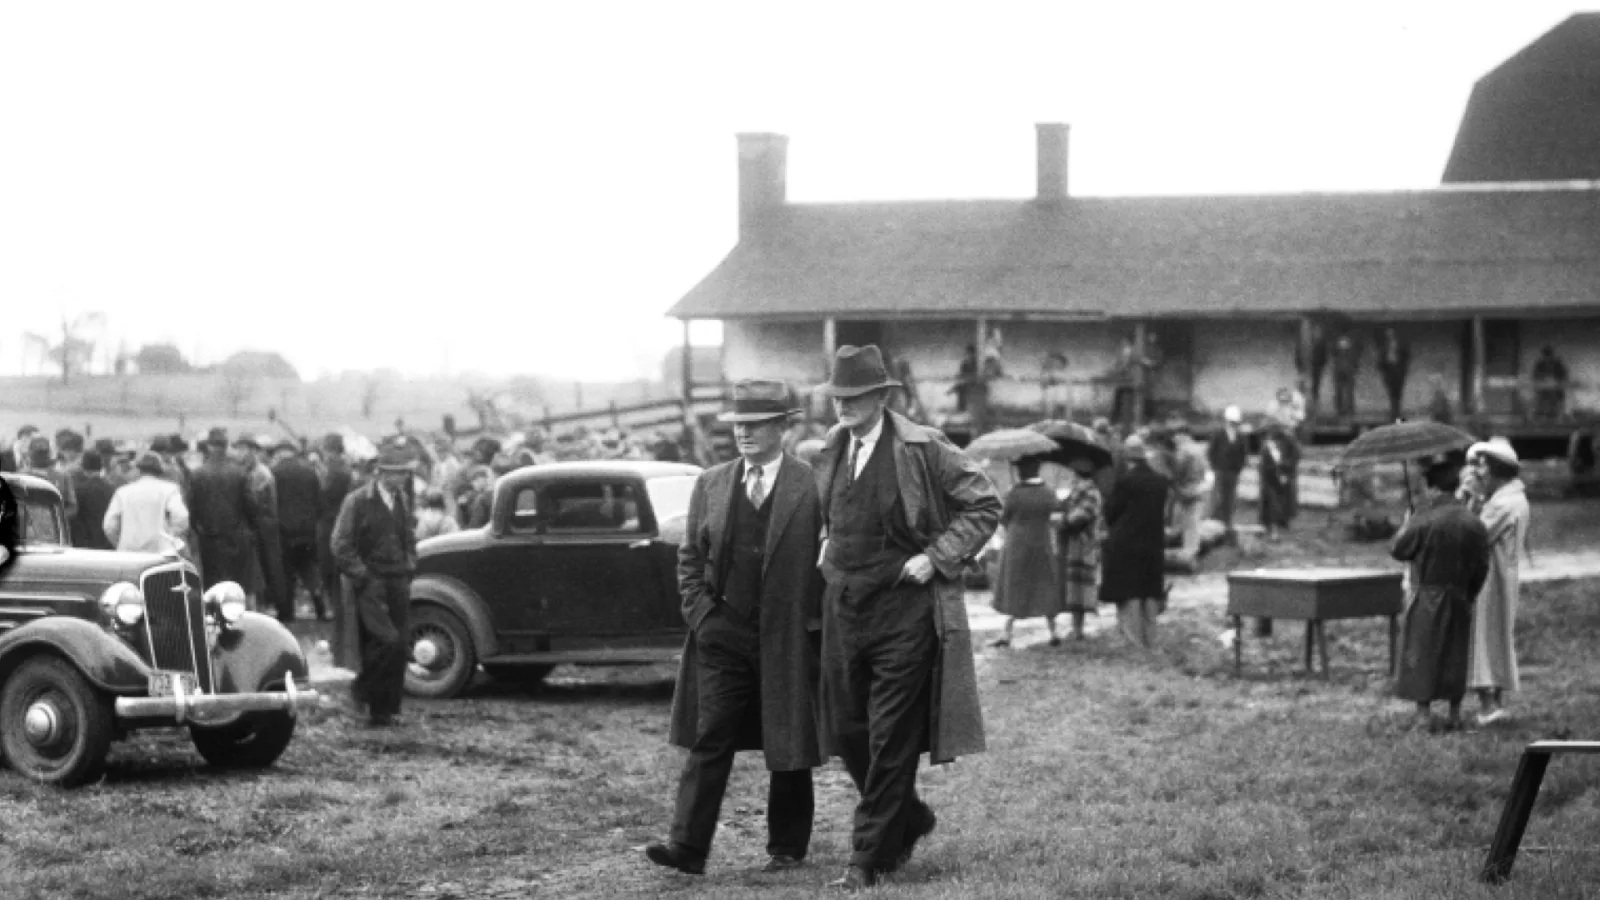 Two men walking through lot filled with cars and people, buildings in background